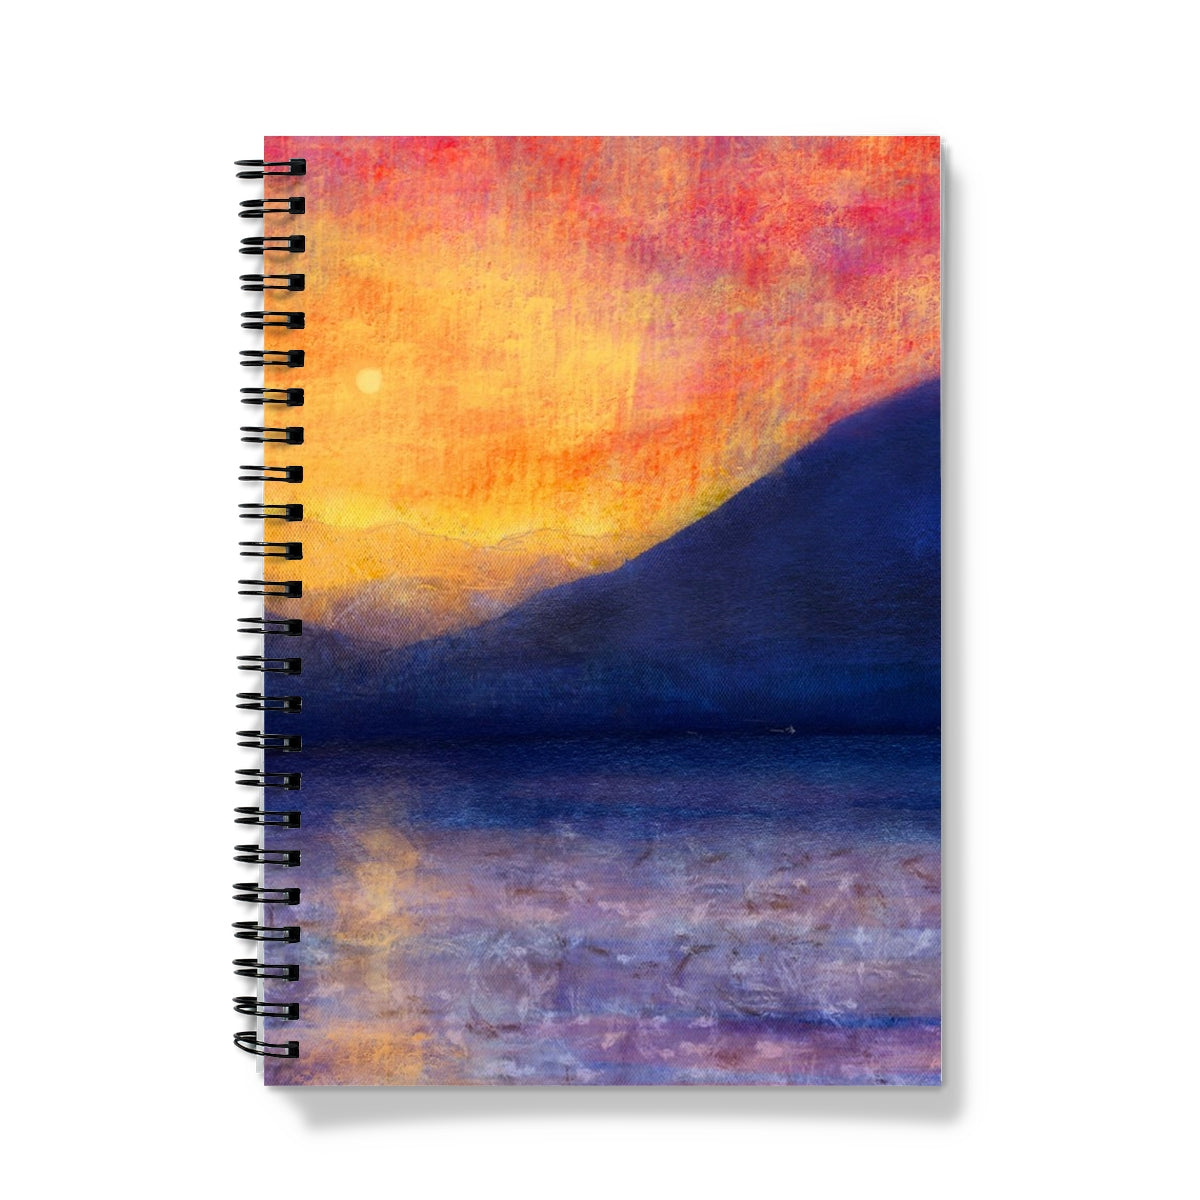 Sunset Approaching Mull Art Gifts Notebook-Journals & Notebooks-Hebridean Islands Art Gallery-A5-Graph-Paintings, Prints, Homeware, Art Gifts From Scotland By Scottish Artist Kevin Hunter